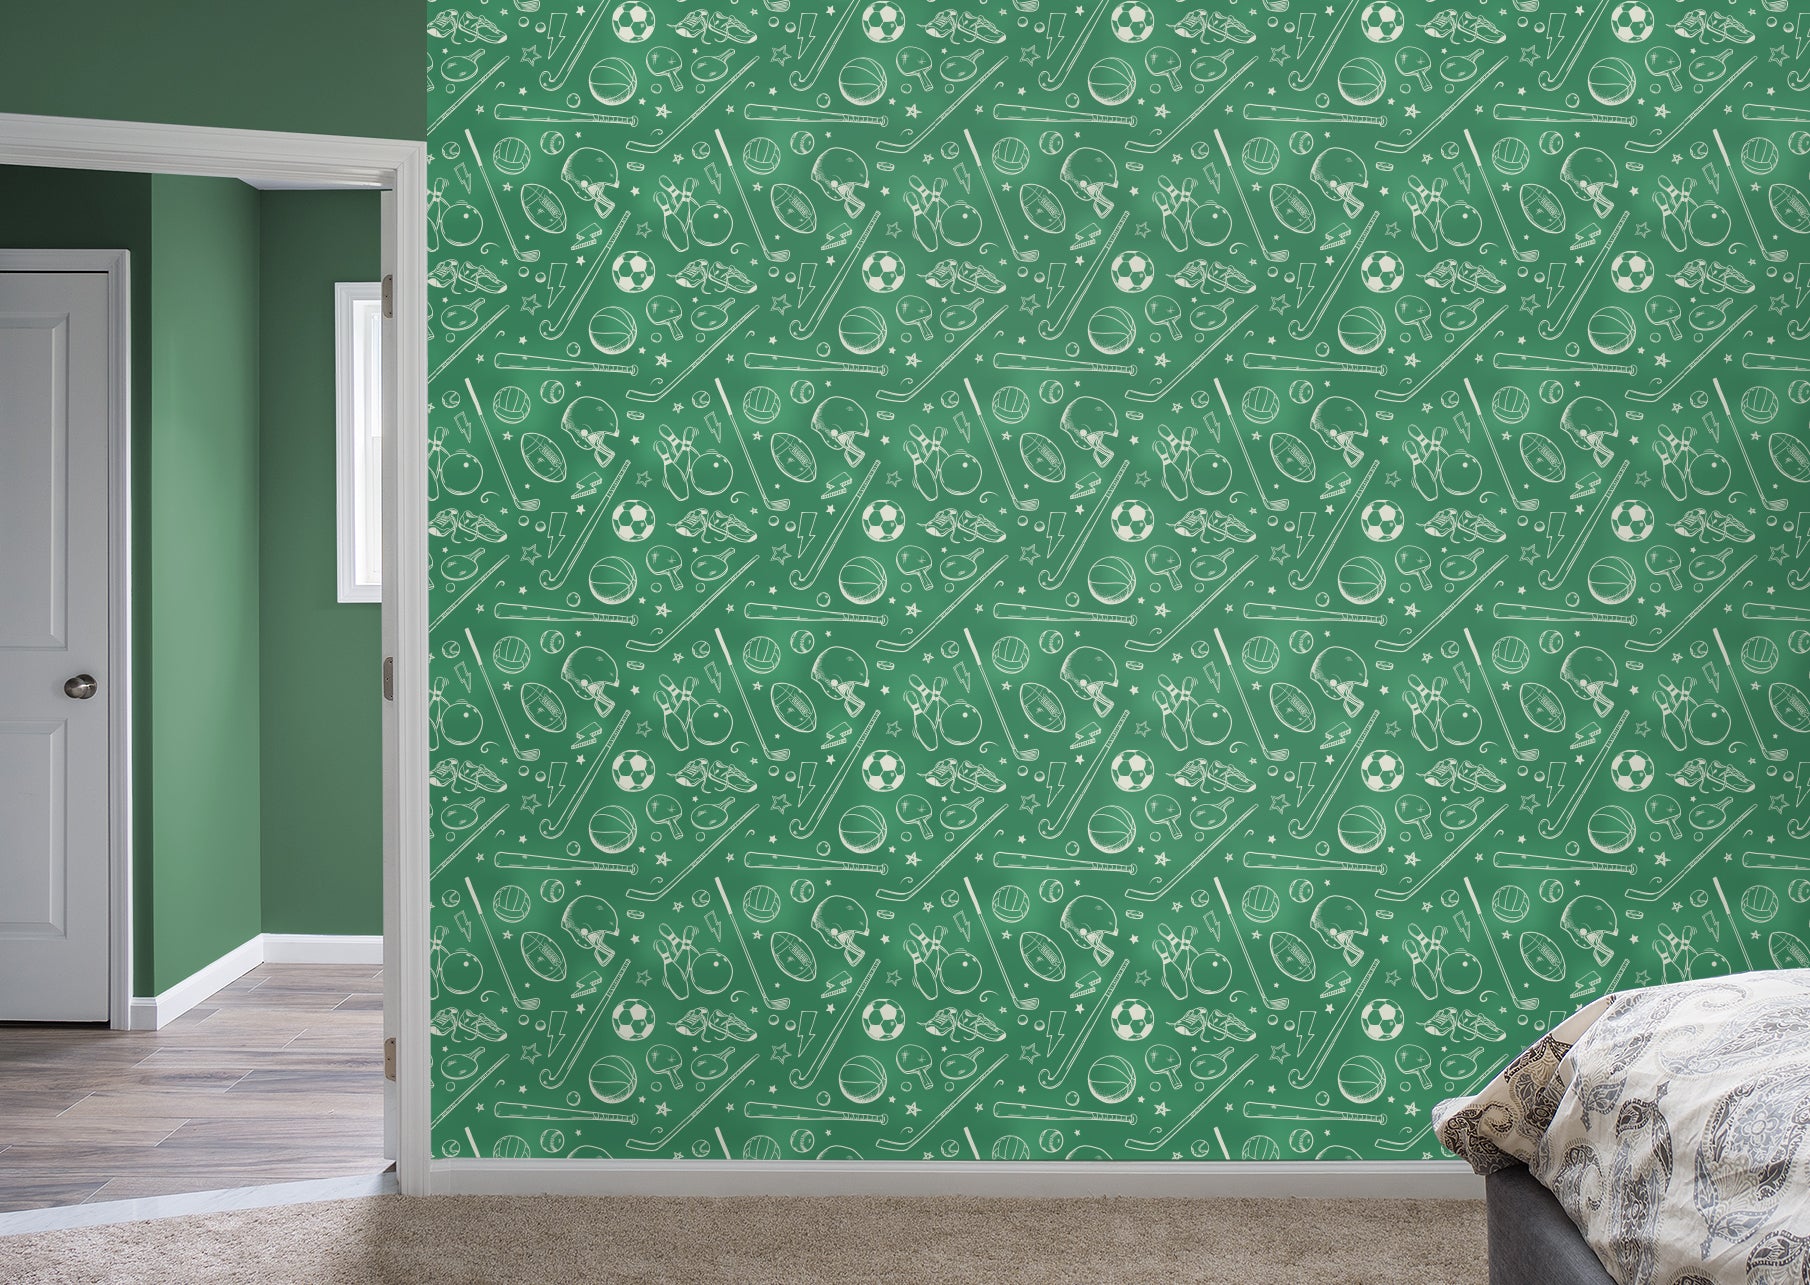 Master of Sports for Sports & Activities - Green for Sports & Activities - Peel & Stick Wallpaper 24" x 12.5 (25 sf) by Fathead